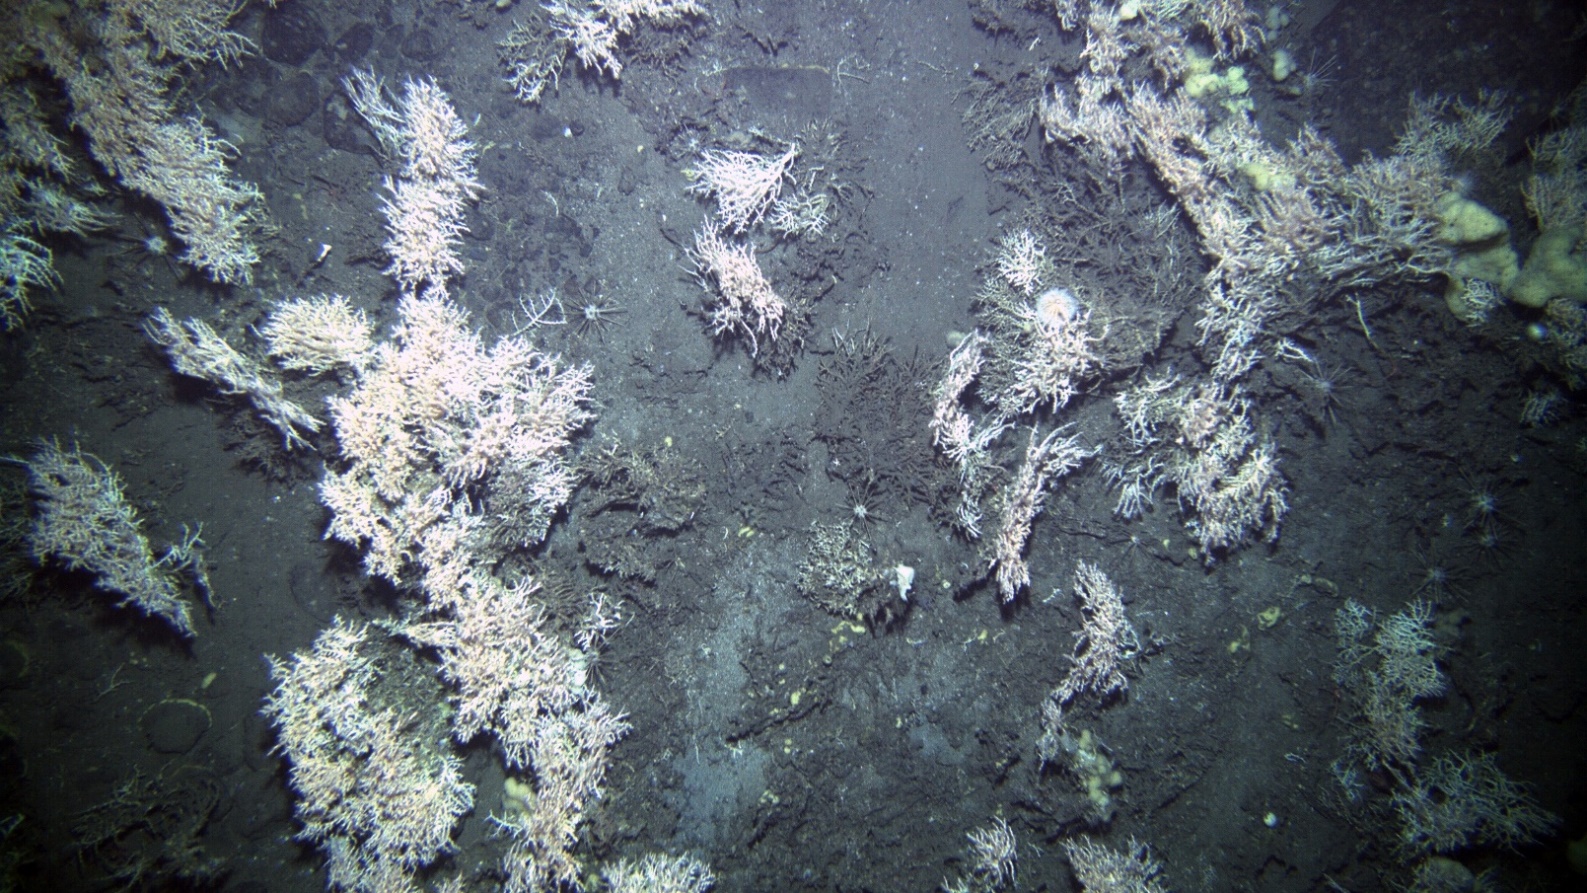 Colour photo collected by the AUV showing clear Lophelia pertusa reef thickets and Mycale Lingua sponges. Details such as Munida squat lobsters and Cidaris urchins are also clear.